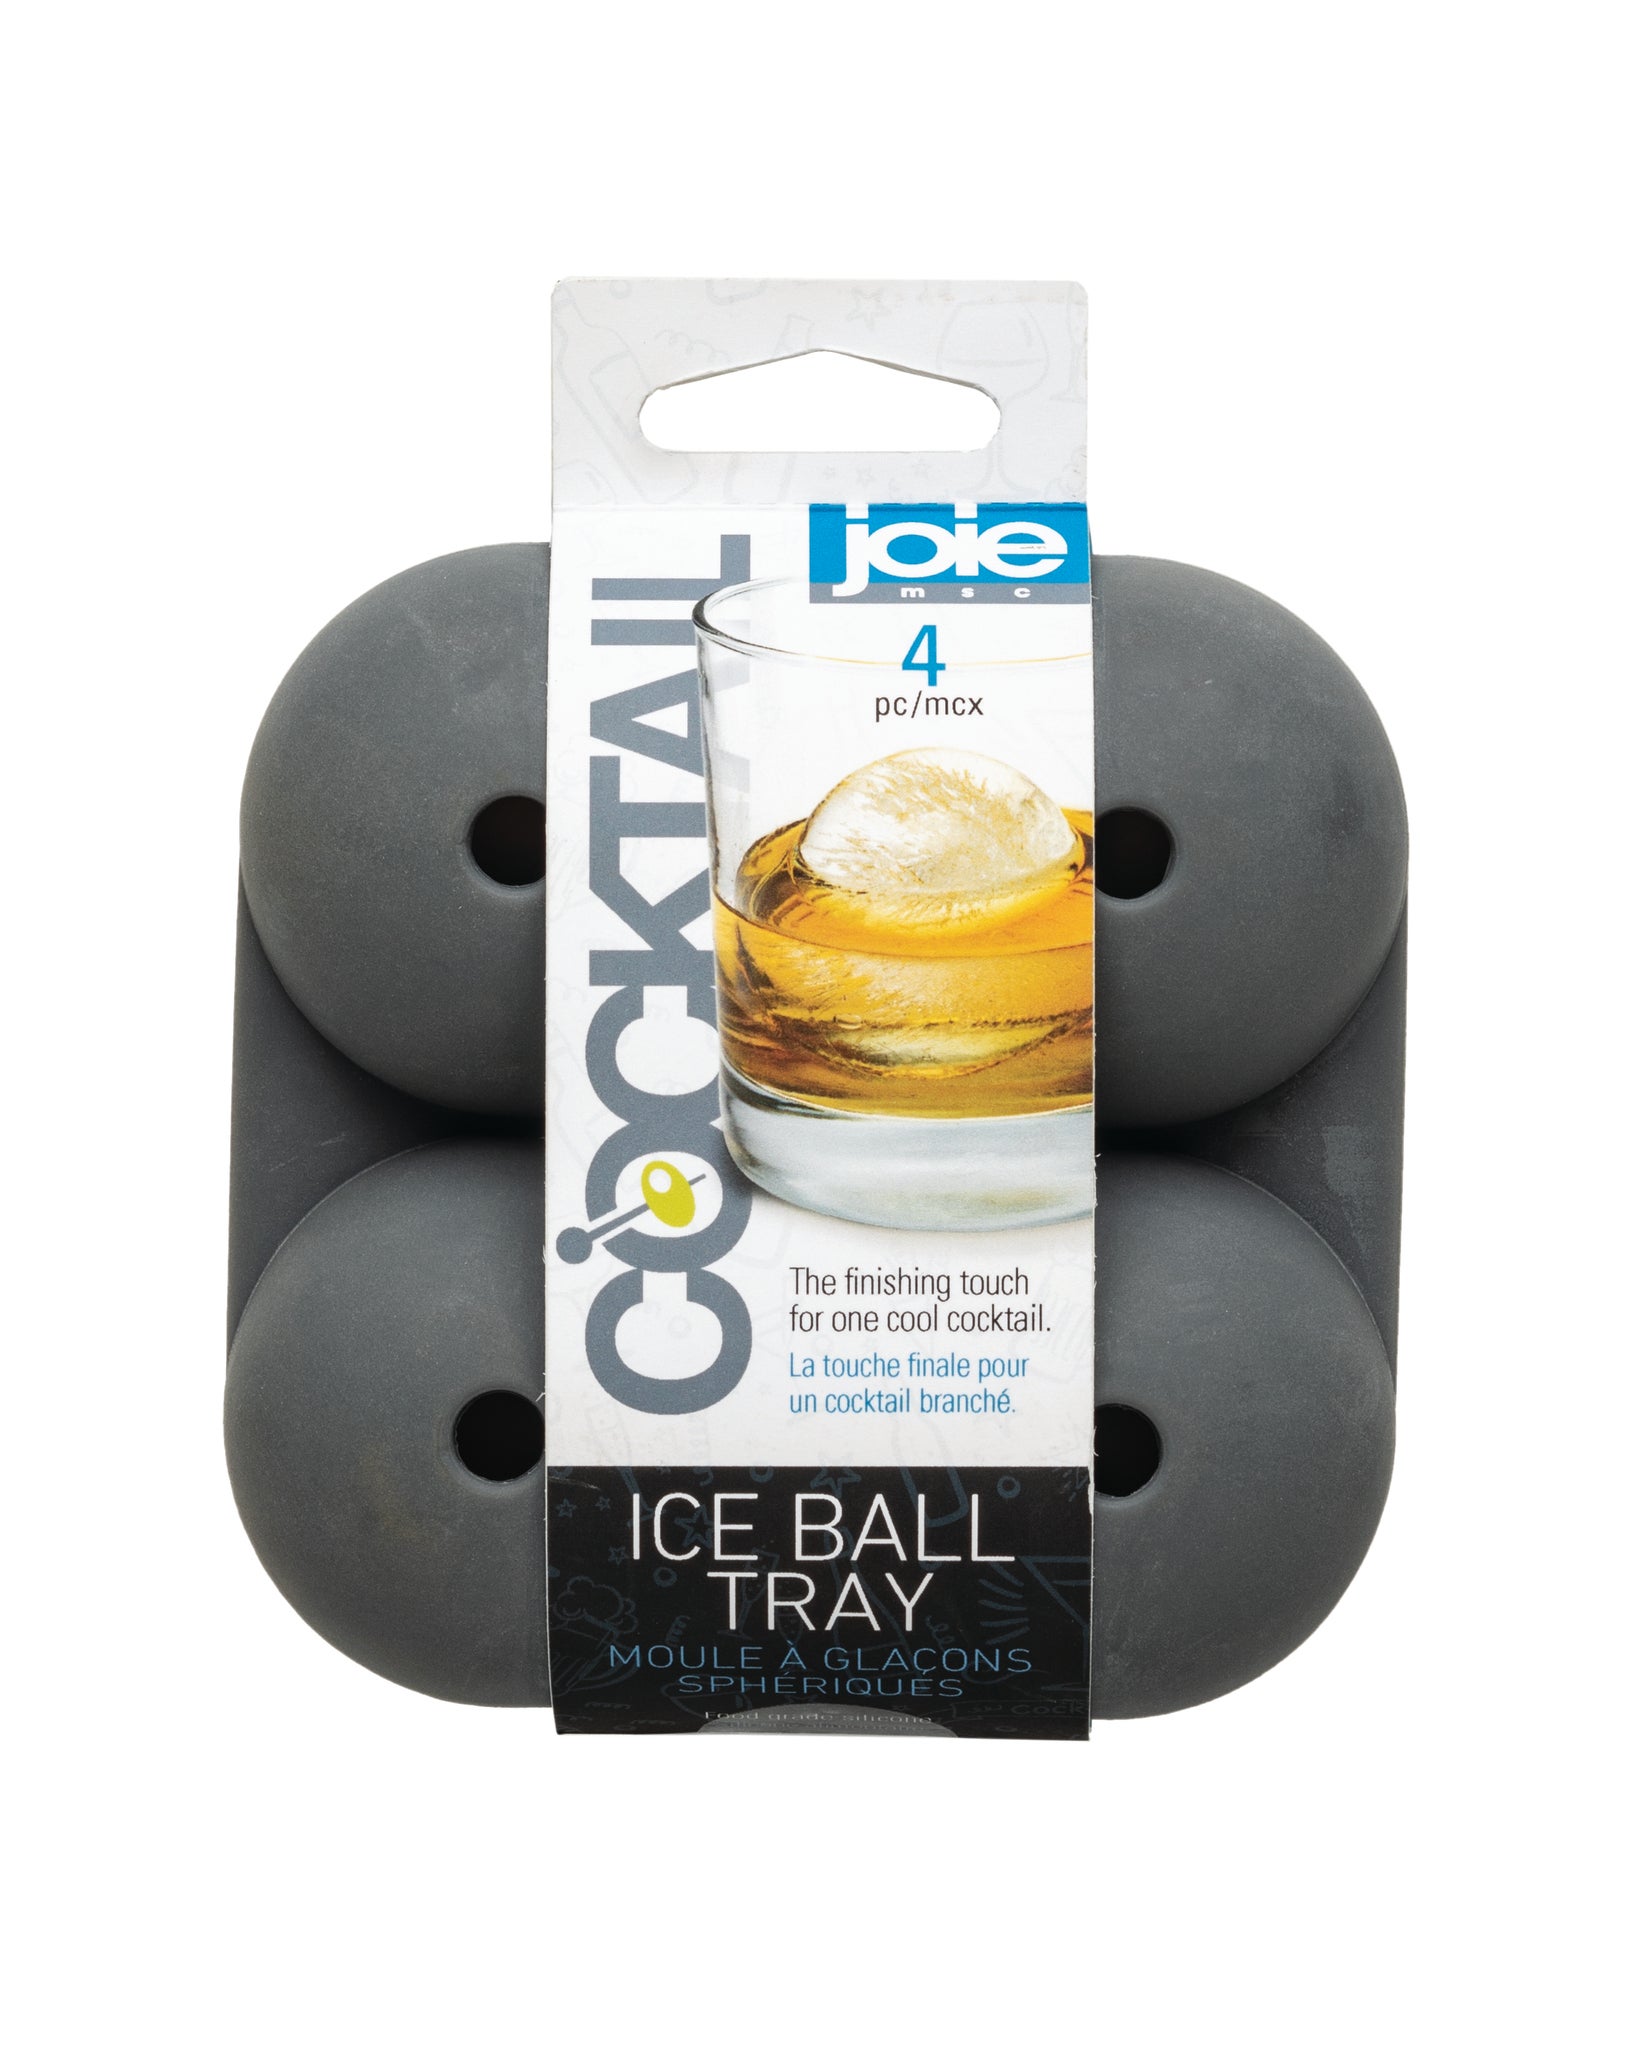 Joie Silicone Ice Ball Tray